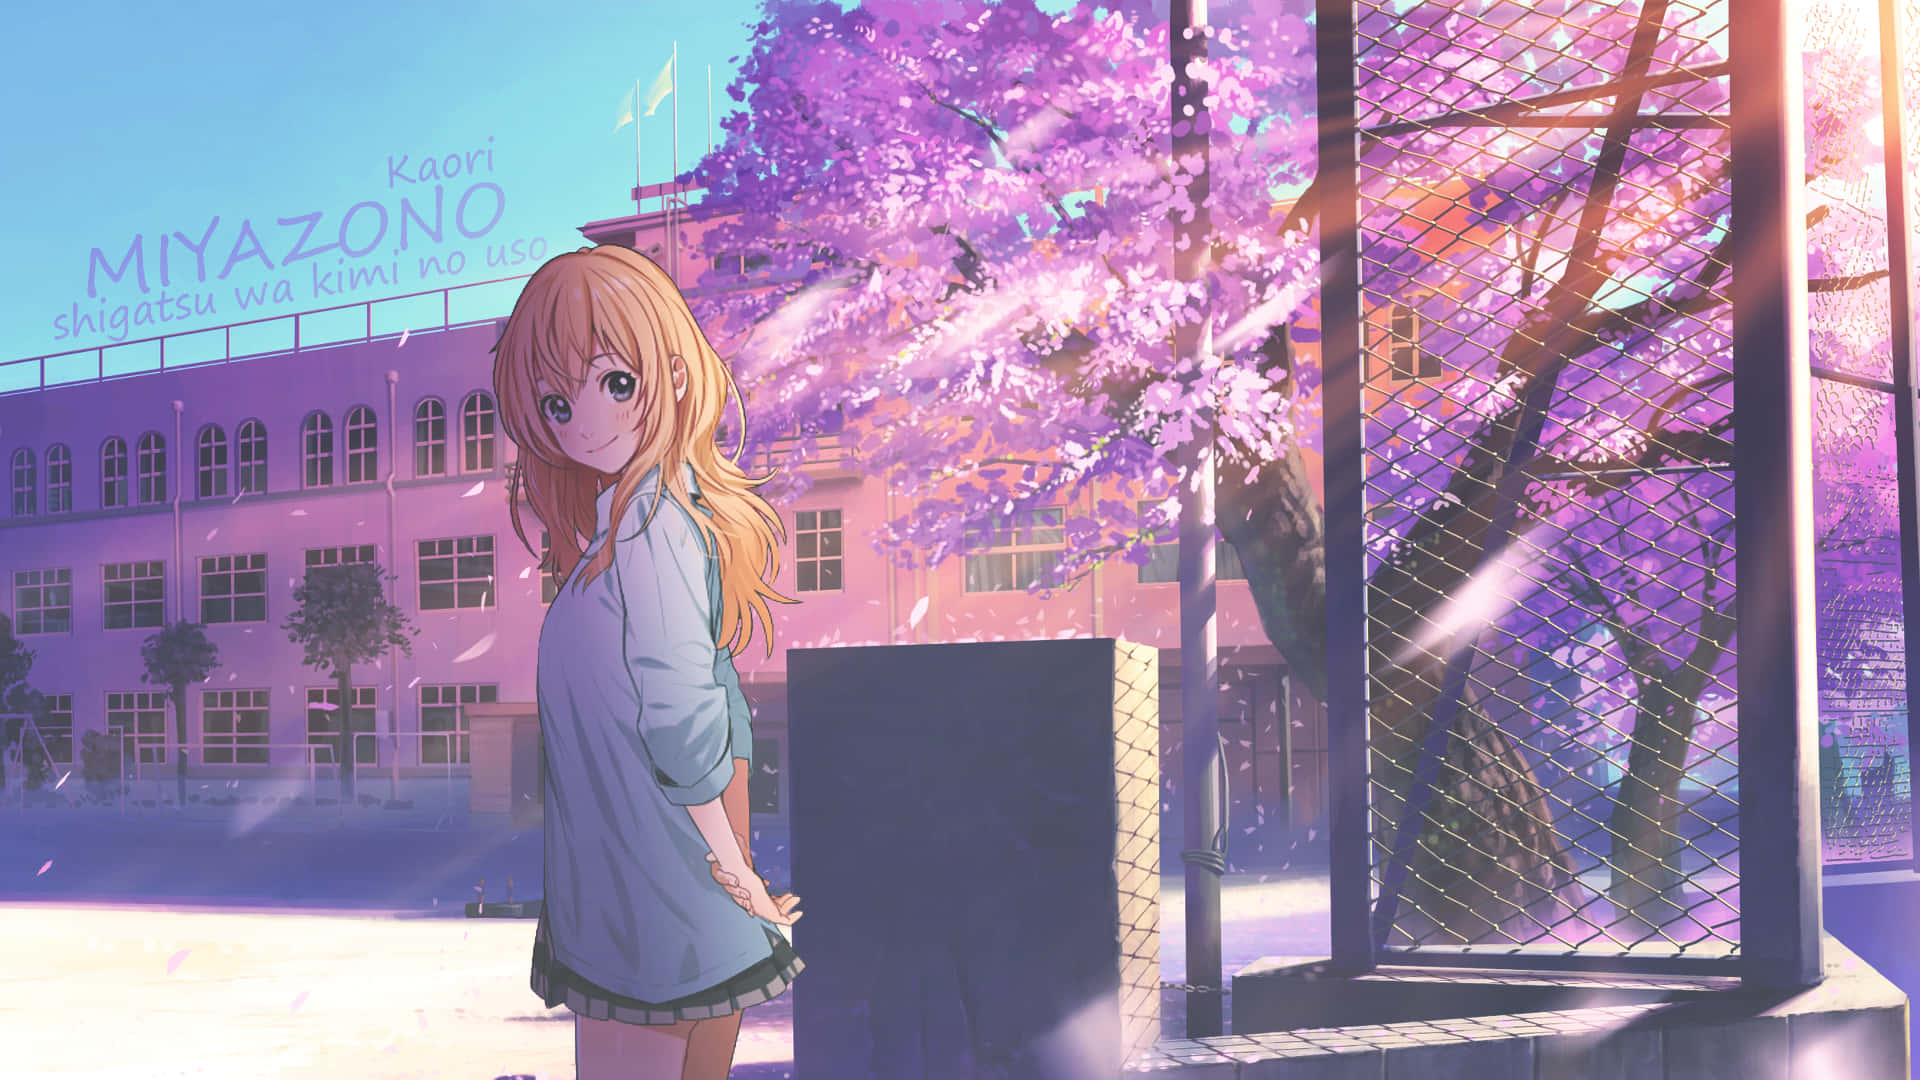 200+] Your Lie In April Backgrounds